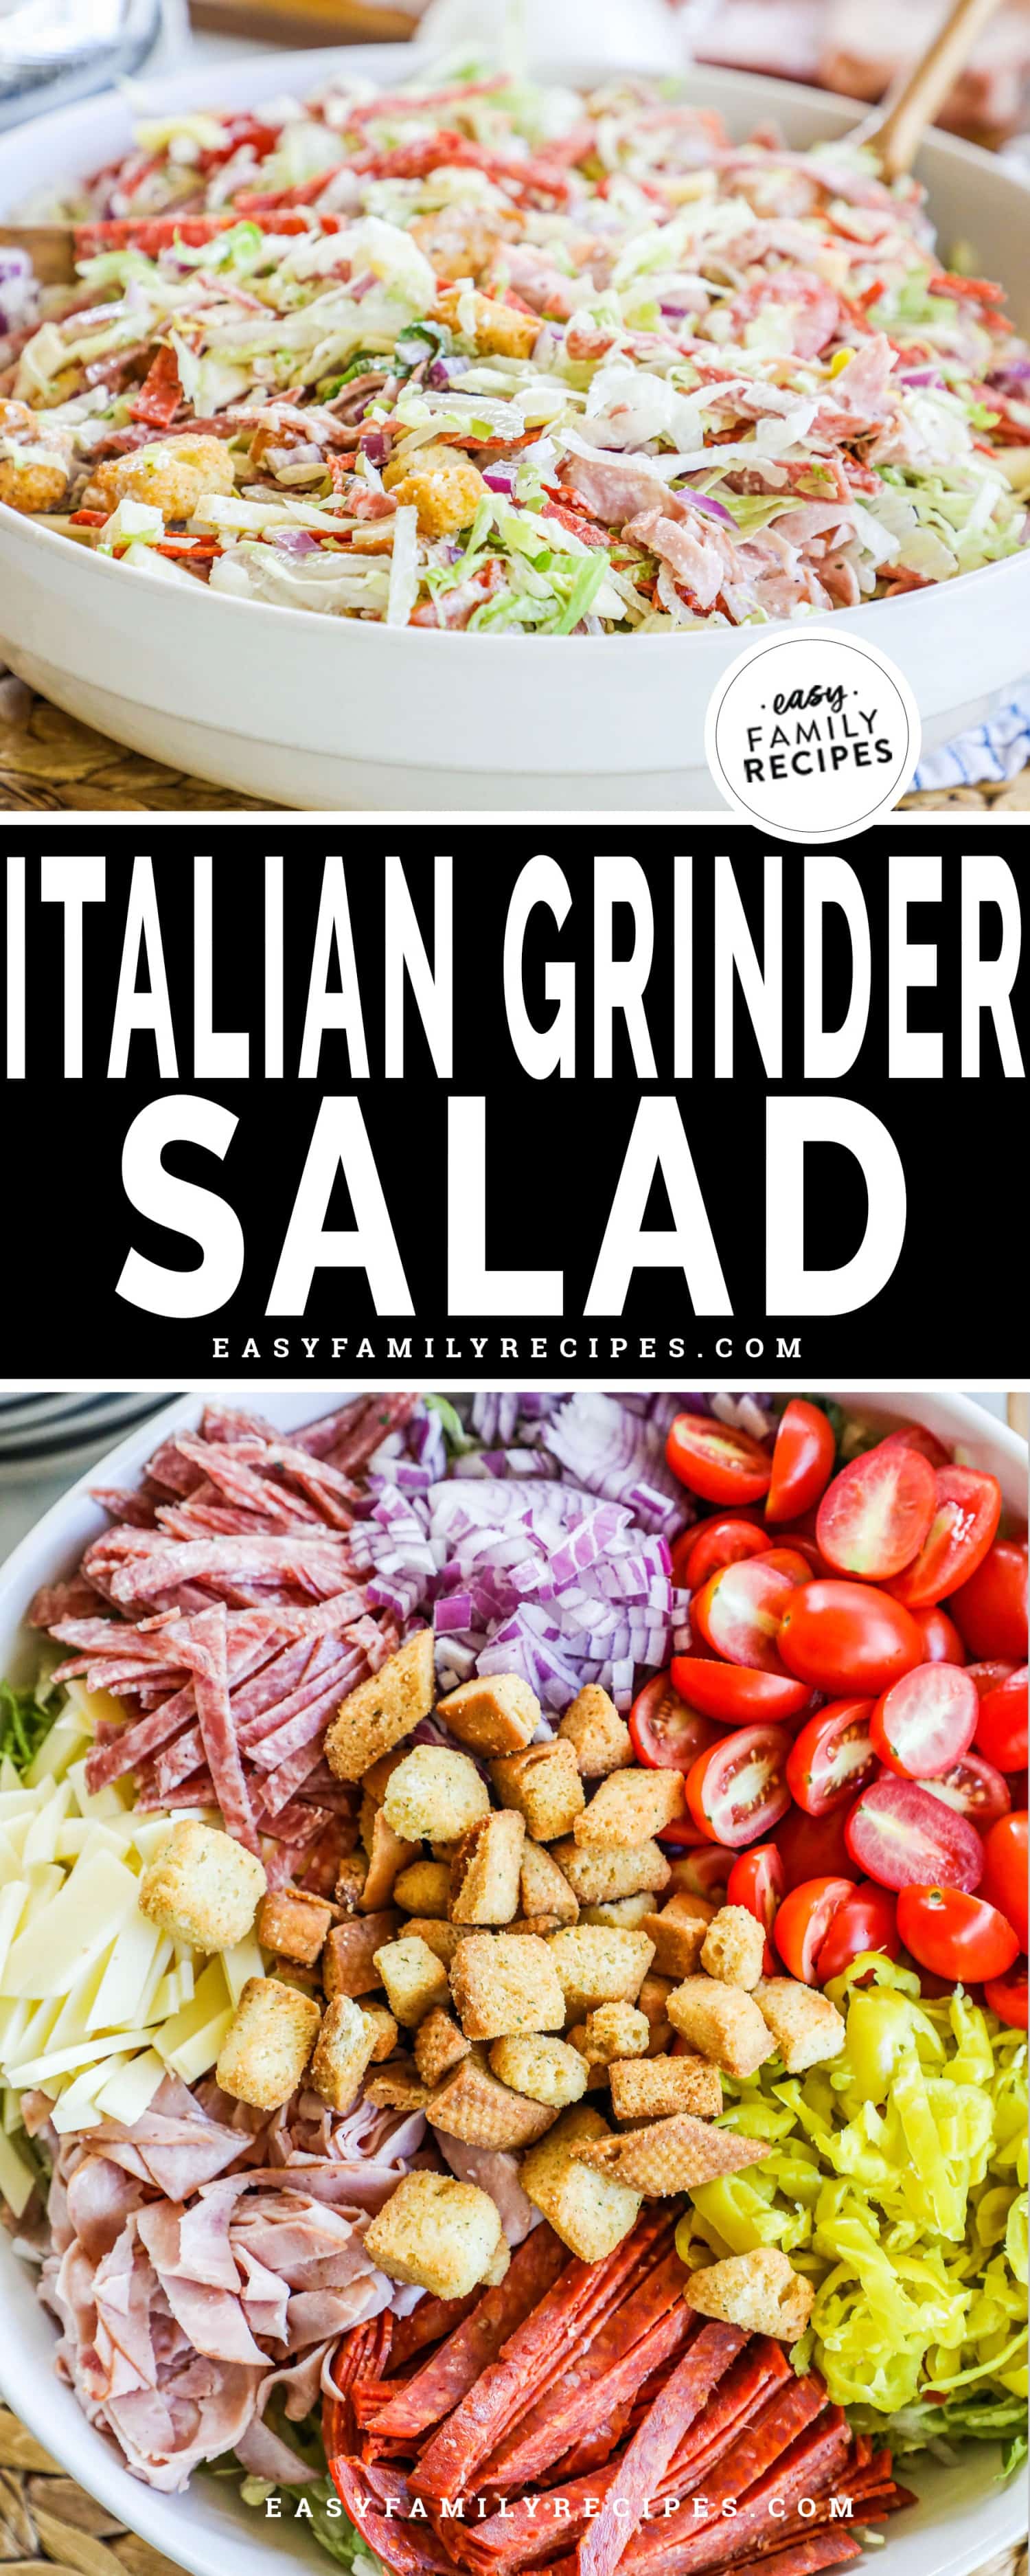 two photos of a grinder salad, one with a bowl of mixed salad and one with the ingredients separate.